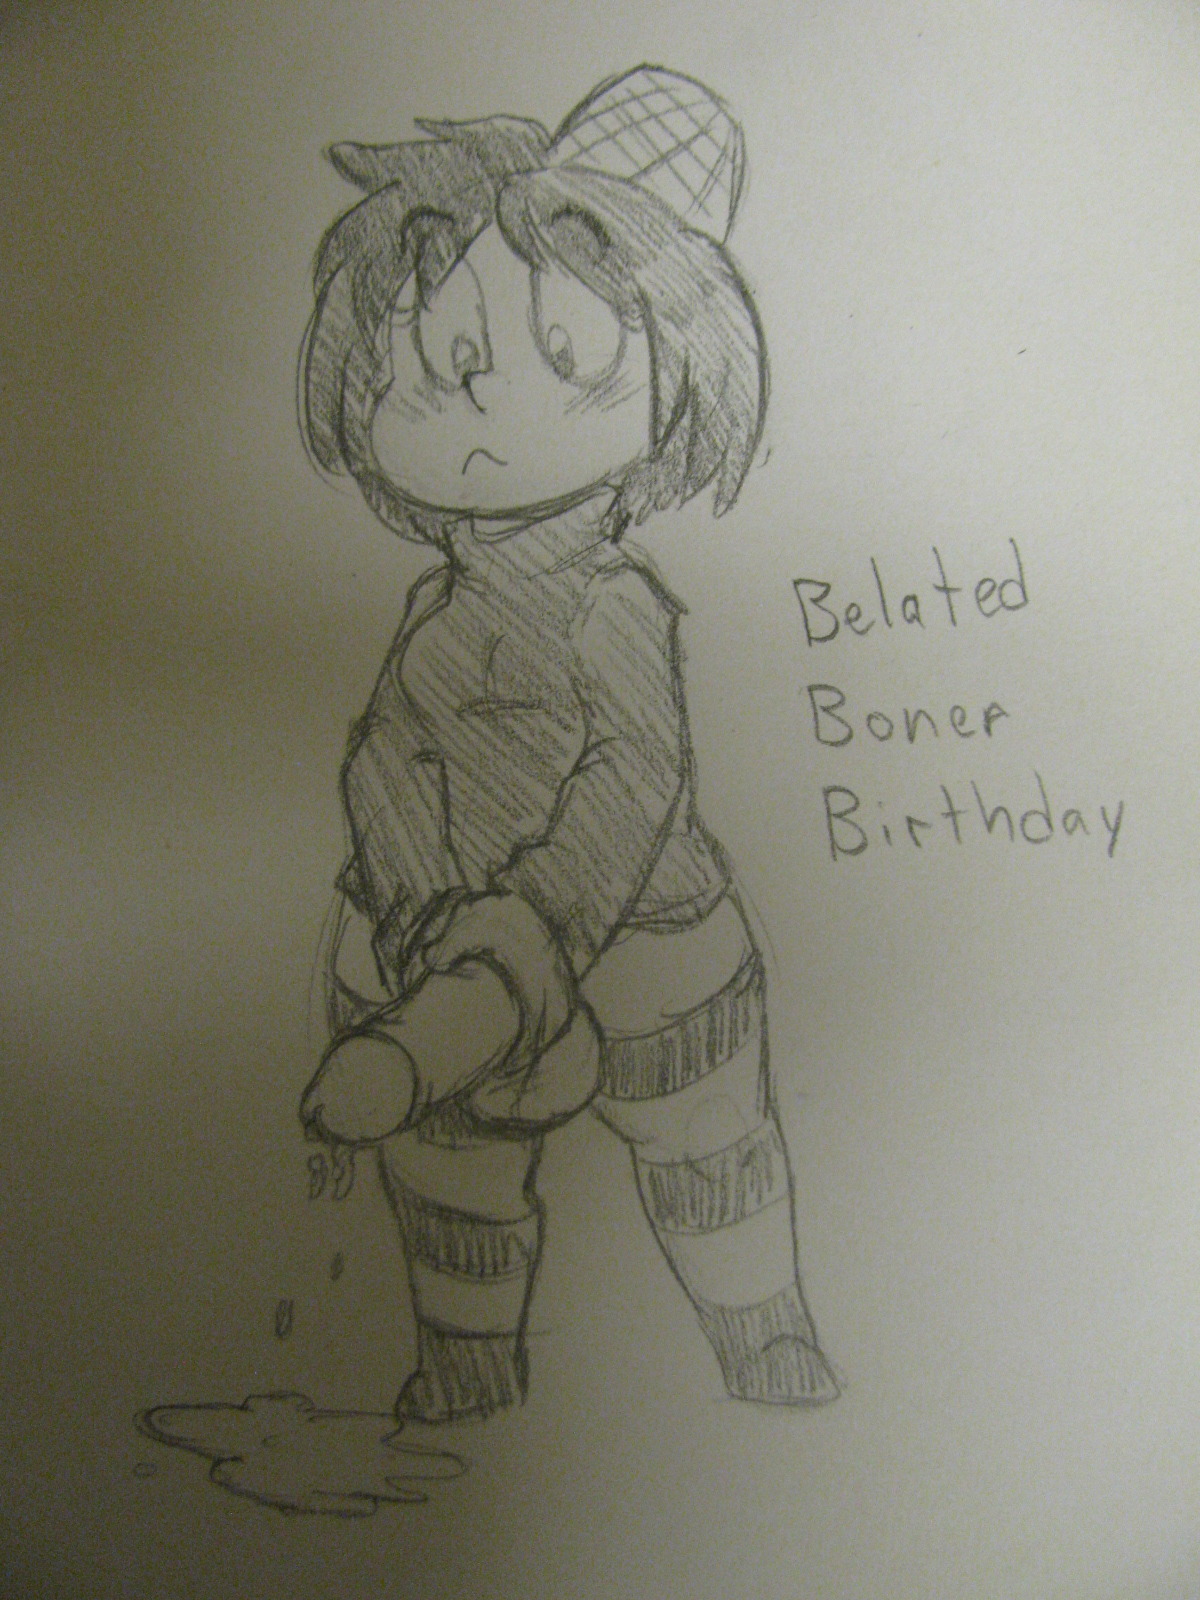 man i havent drawn on paper in years happ late bday aintsmart